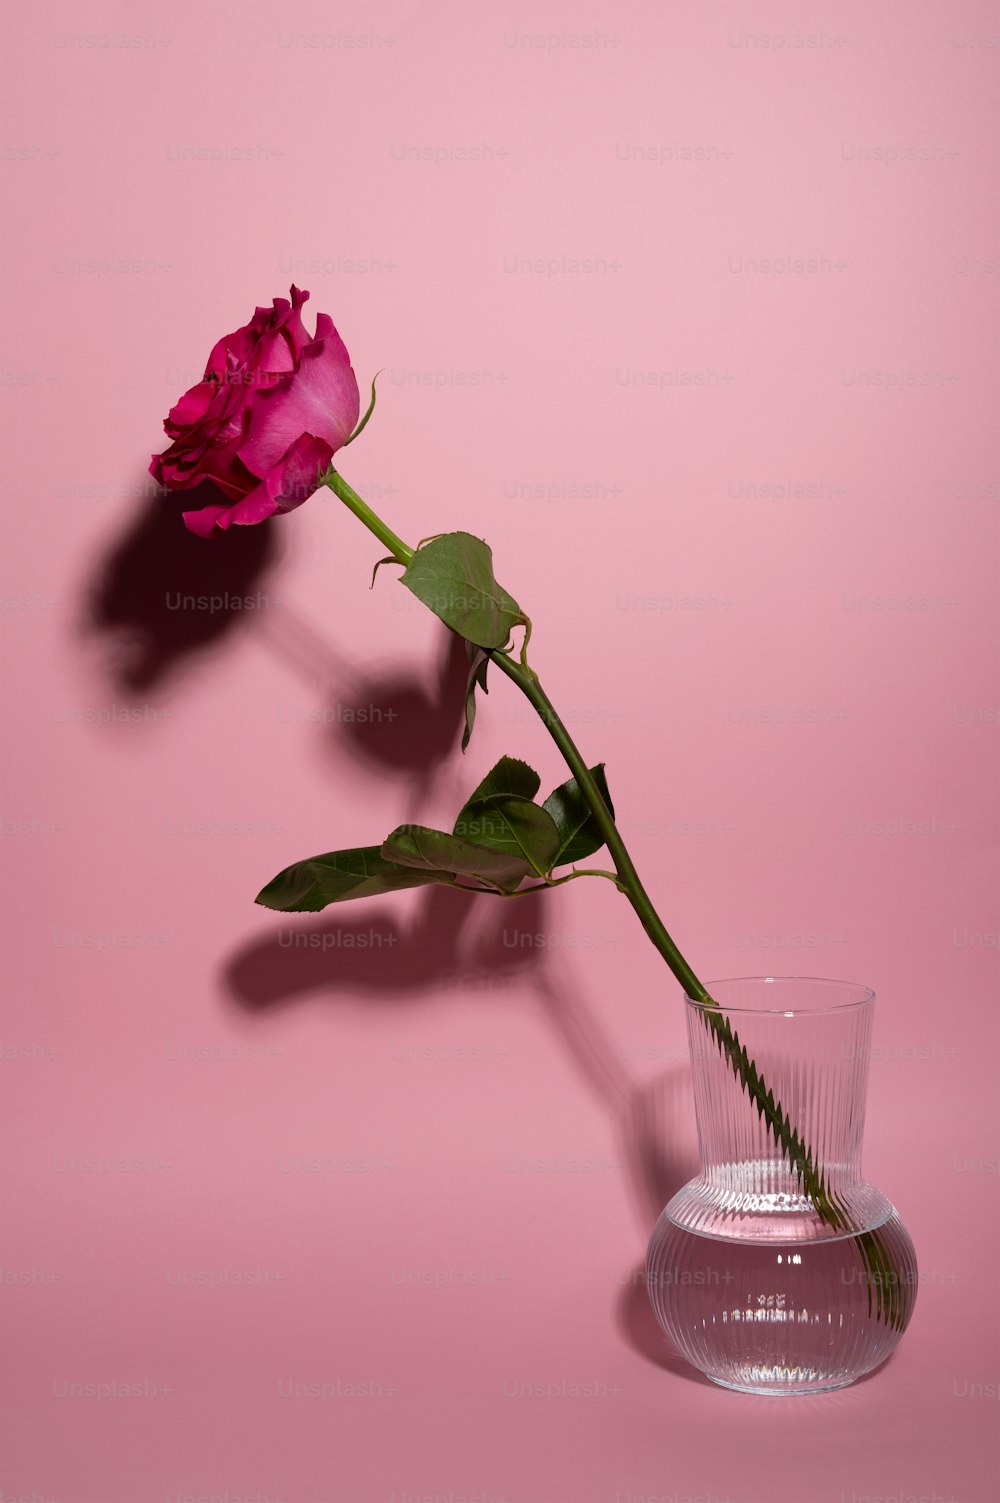 a pink rose in a glass vase